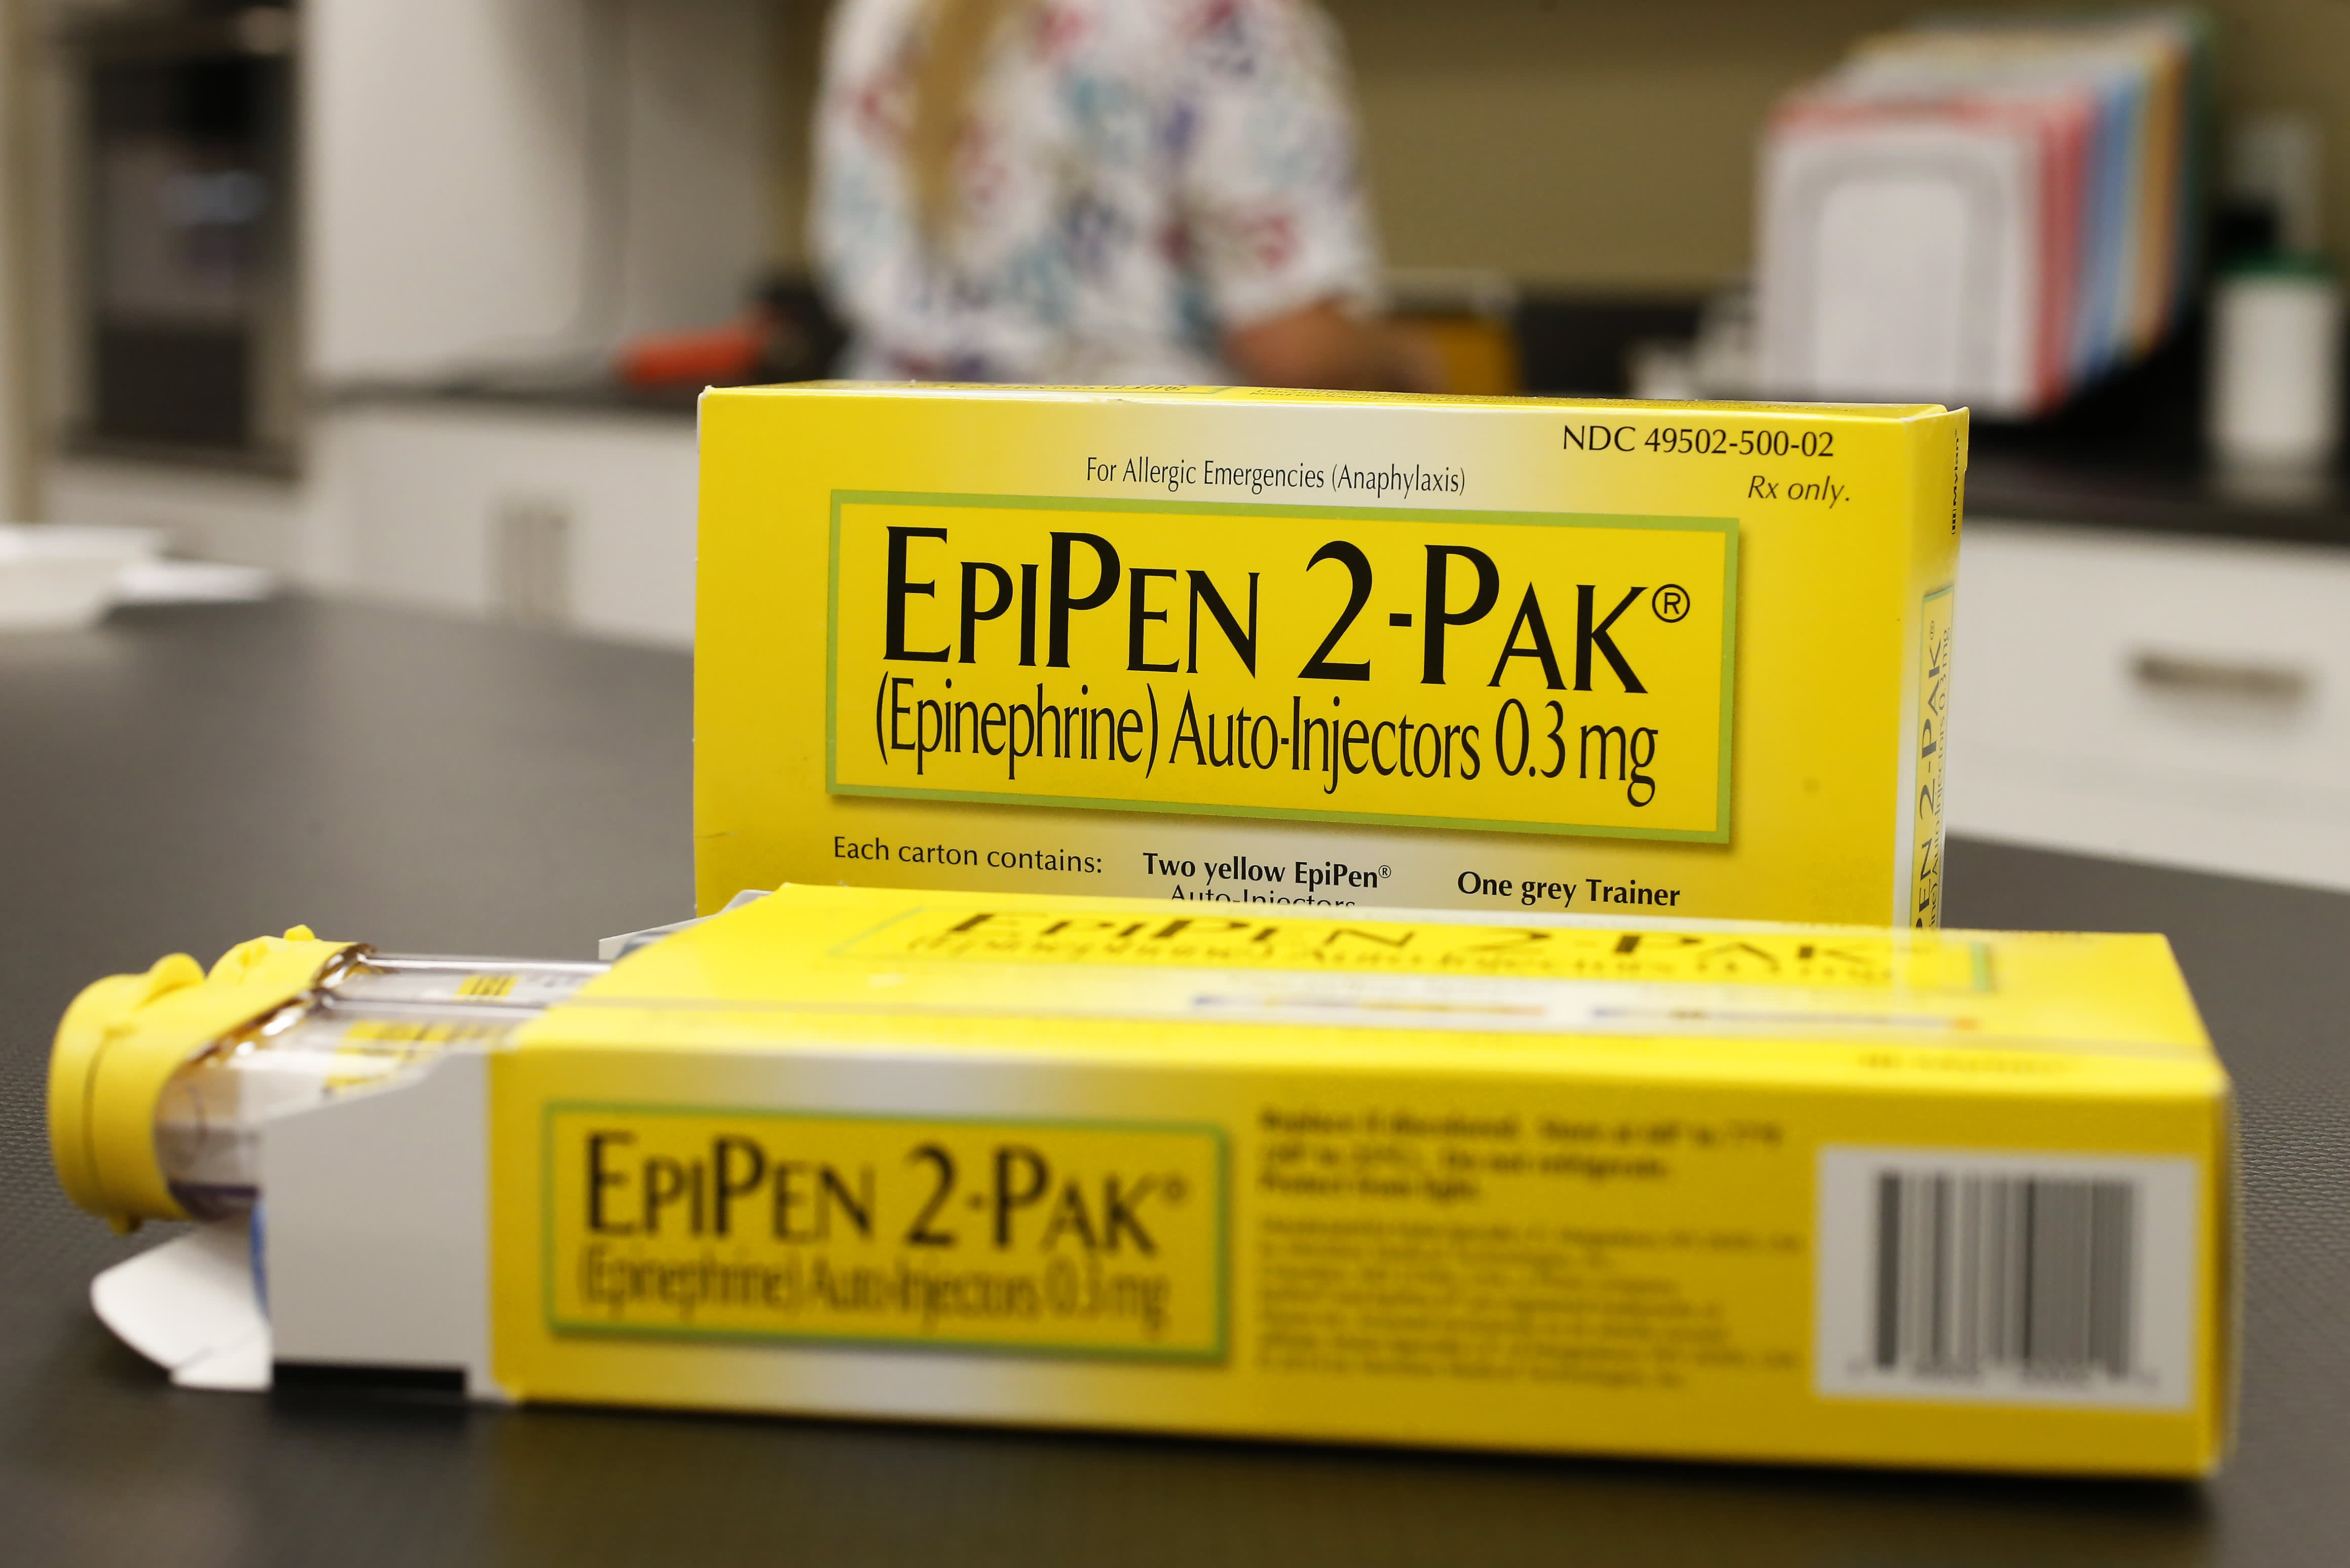 New York attorney general launches antitrust probe of Mylan's EpiPen  contracts